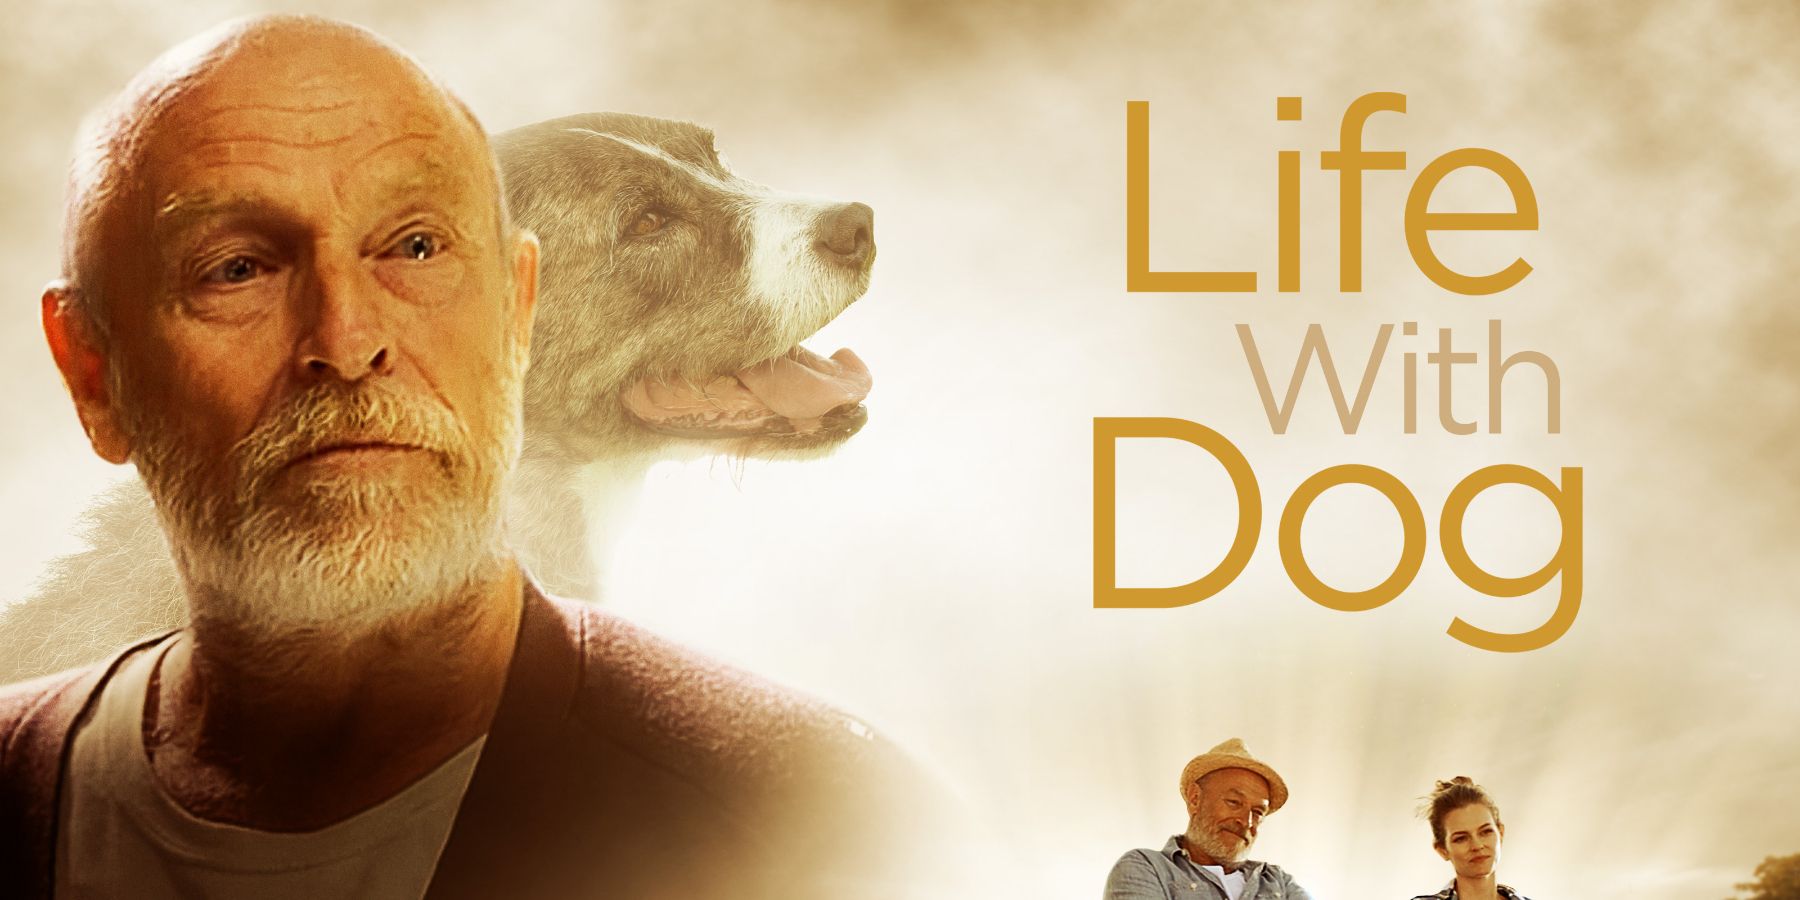 Life With Dog on Amazon Prime Video